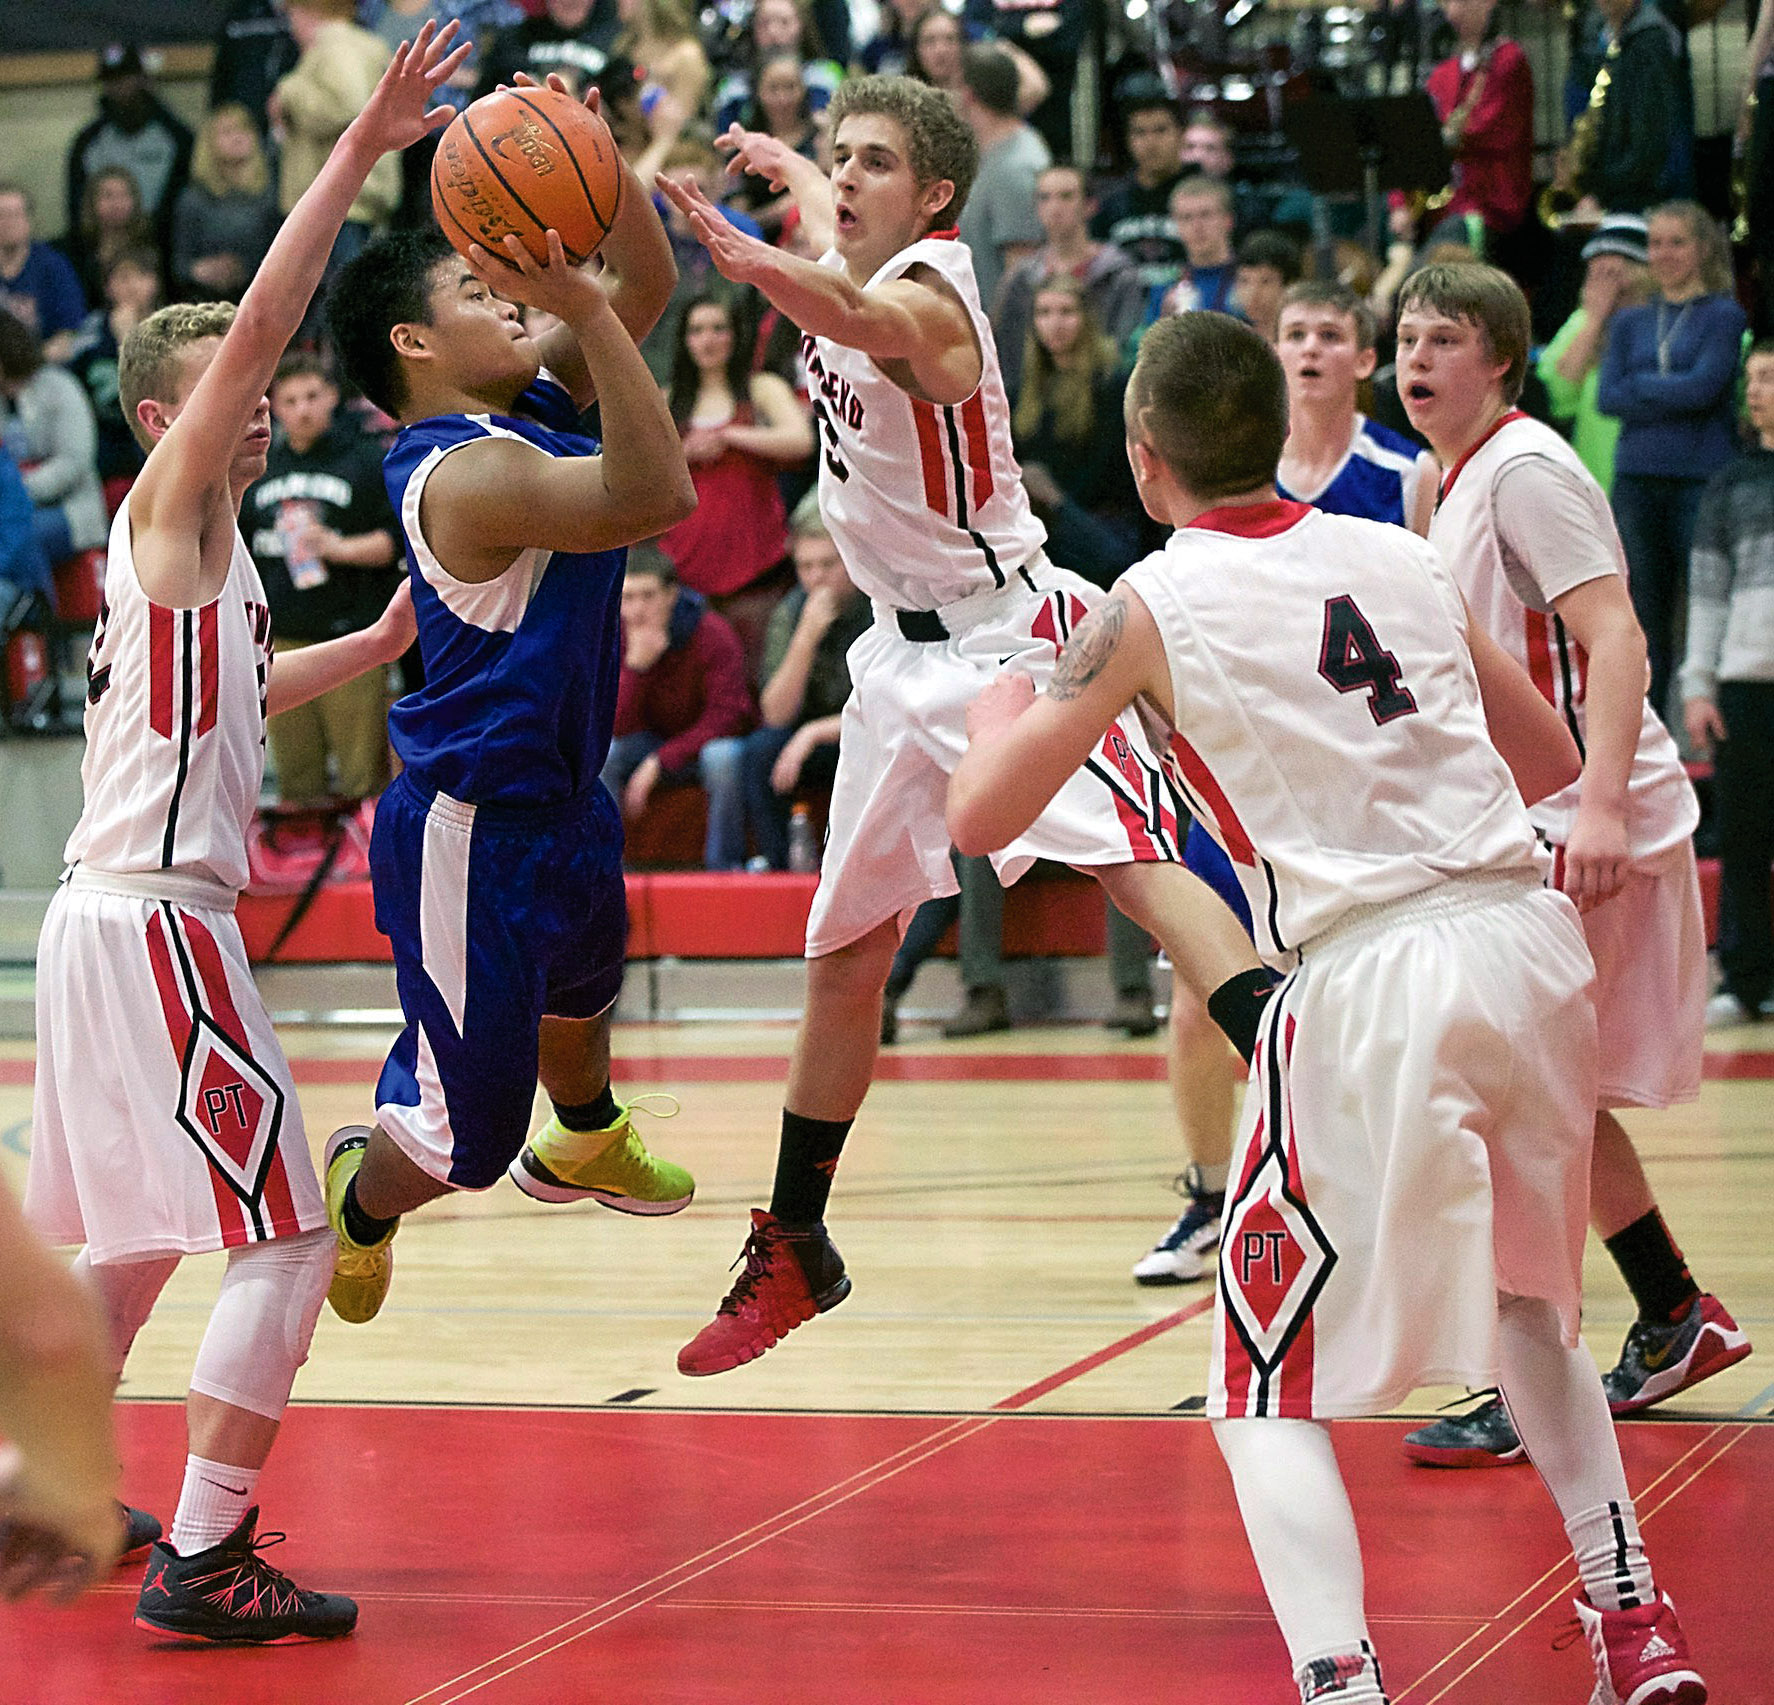 Chimacum's Victor Hitt goes up for a shot against Port Townsend's Patrick Charlton